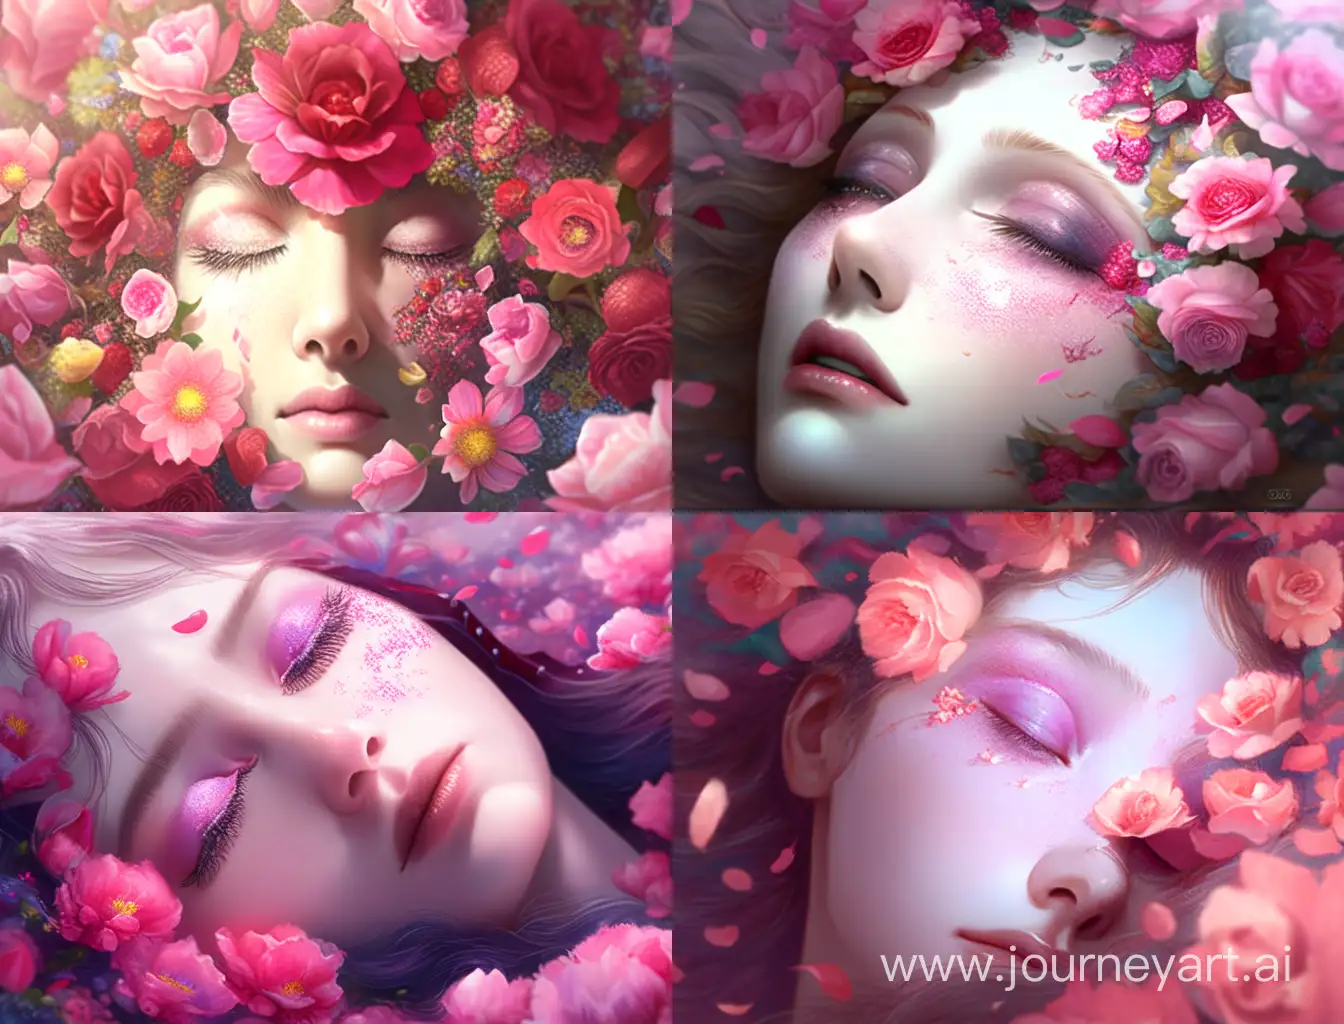 a close up of a woman's face surrounded by flowers, featured on cgsociety, (pink colors), dormant nature, synthetic bio skin, the flower prince, sleeping beauty, japanese flower arrangements, large individual rose petals